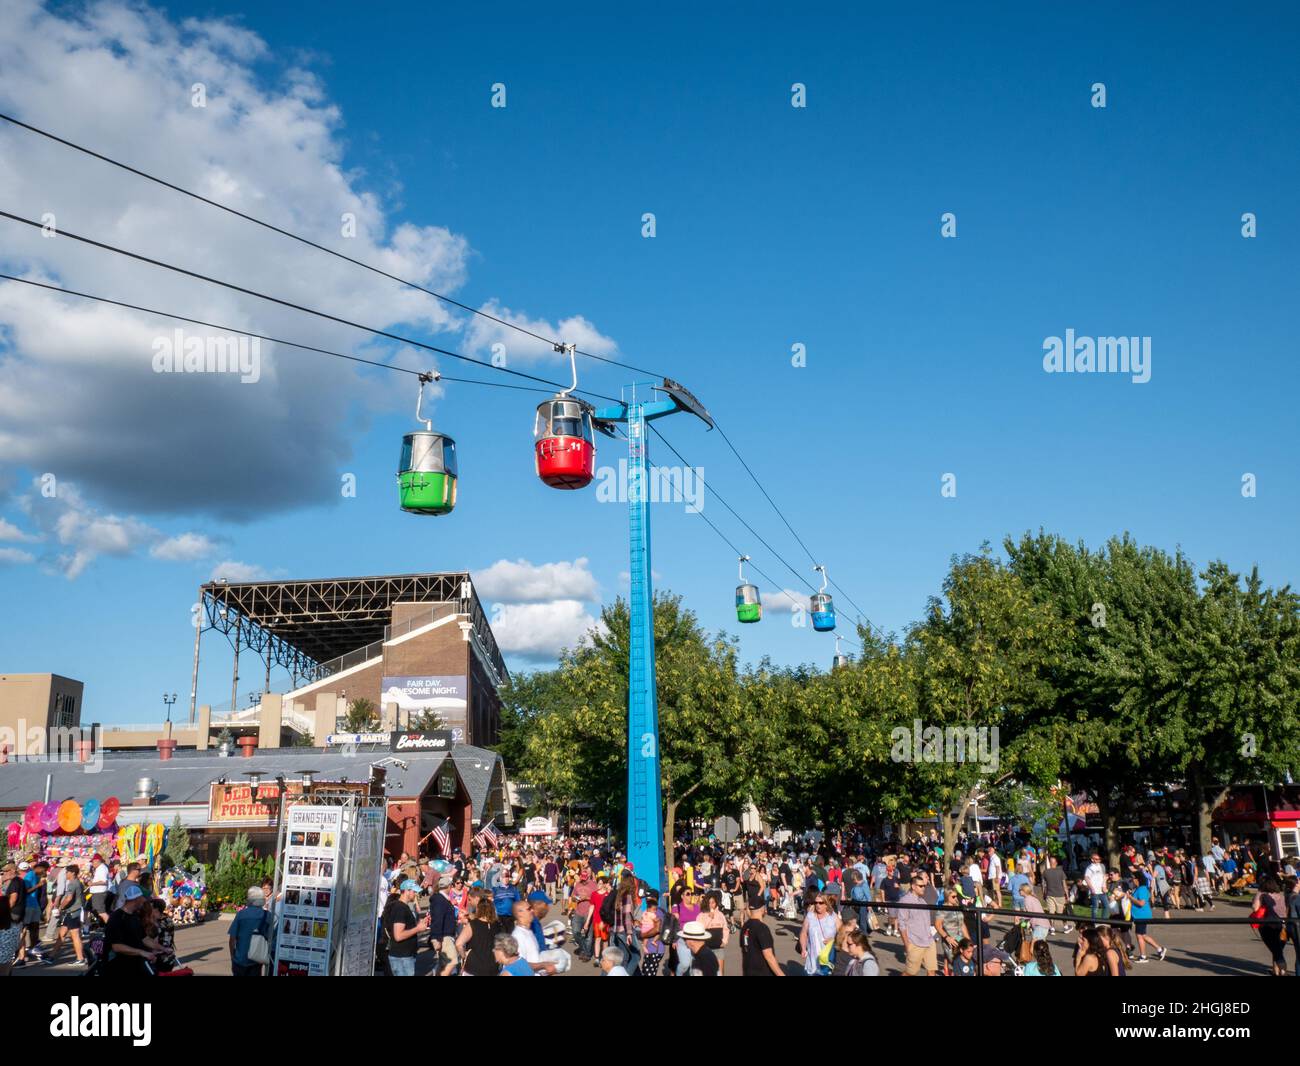 FALCON HEIGHTS, MN - 23 AUG 2019: The Sky Ride is an aerial cable ride with colorful gondolas at the Minnesota State Fair. Stock Photo